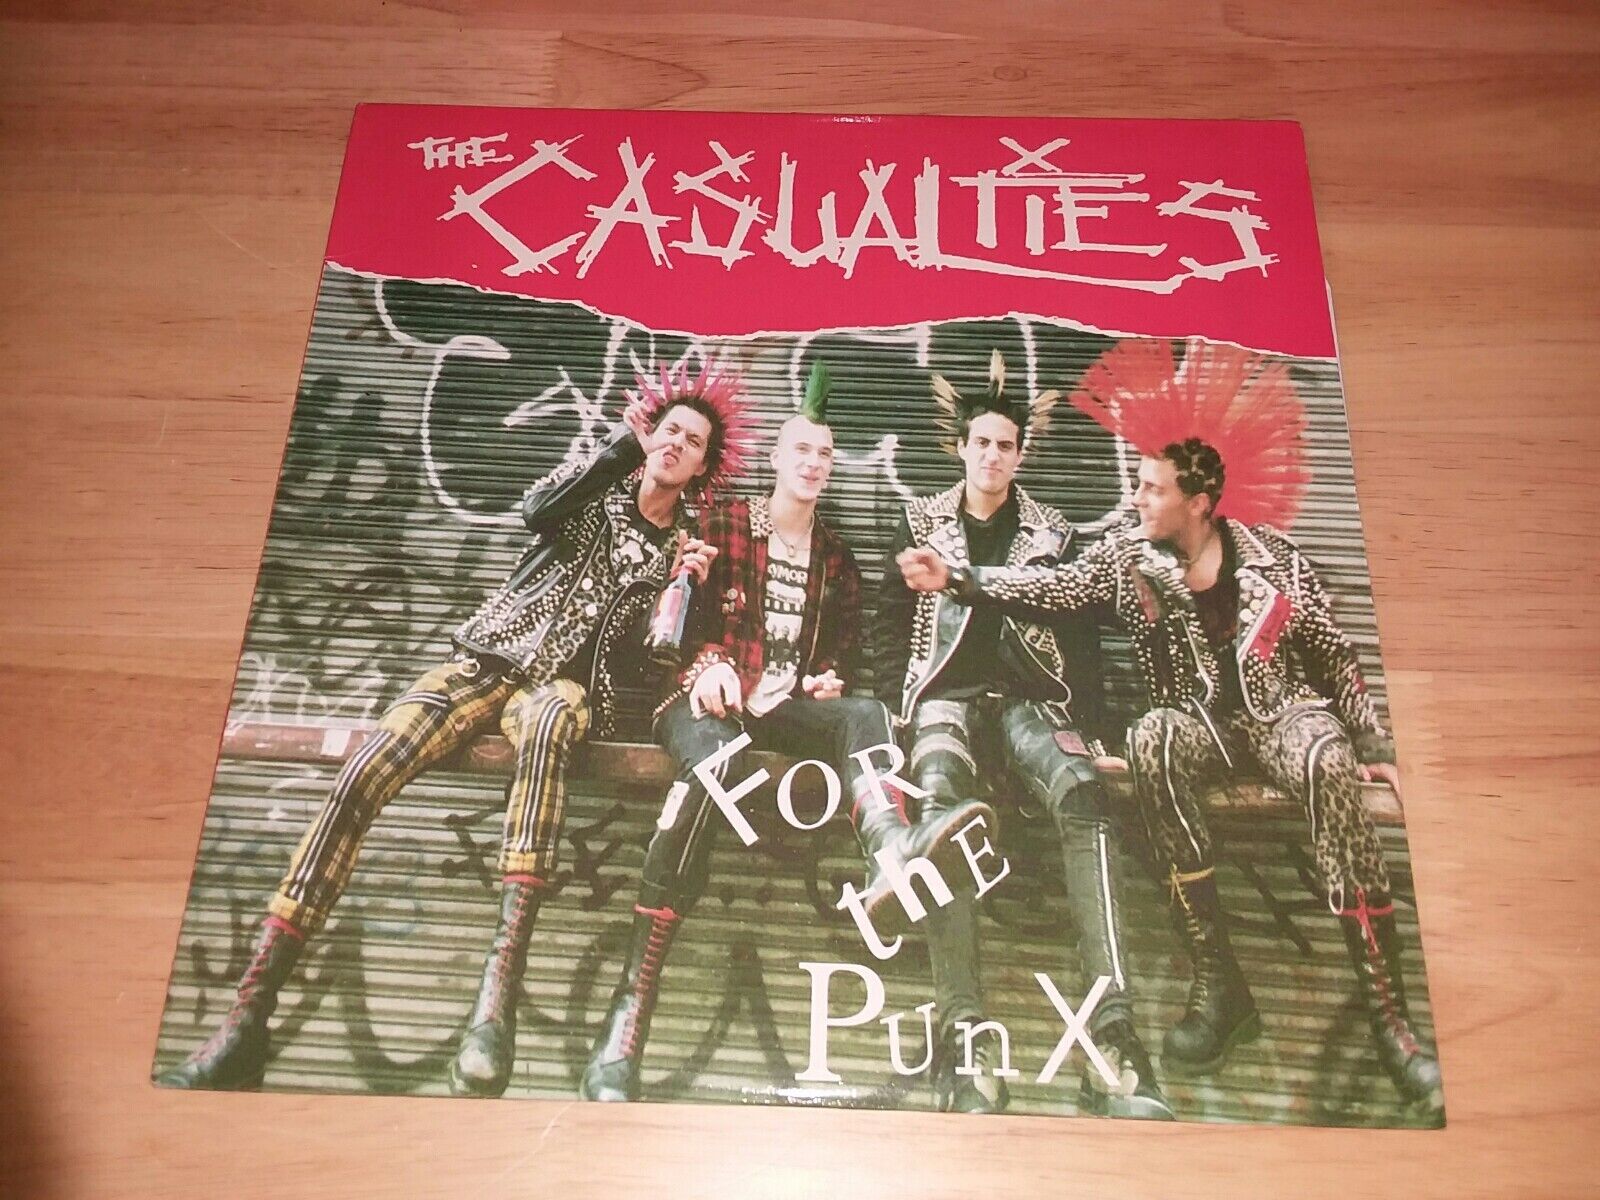 The Casualties - For the Punx Vinyl Punk Record LP 1997 Twr-12097 